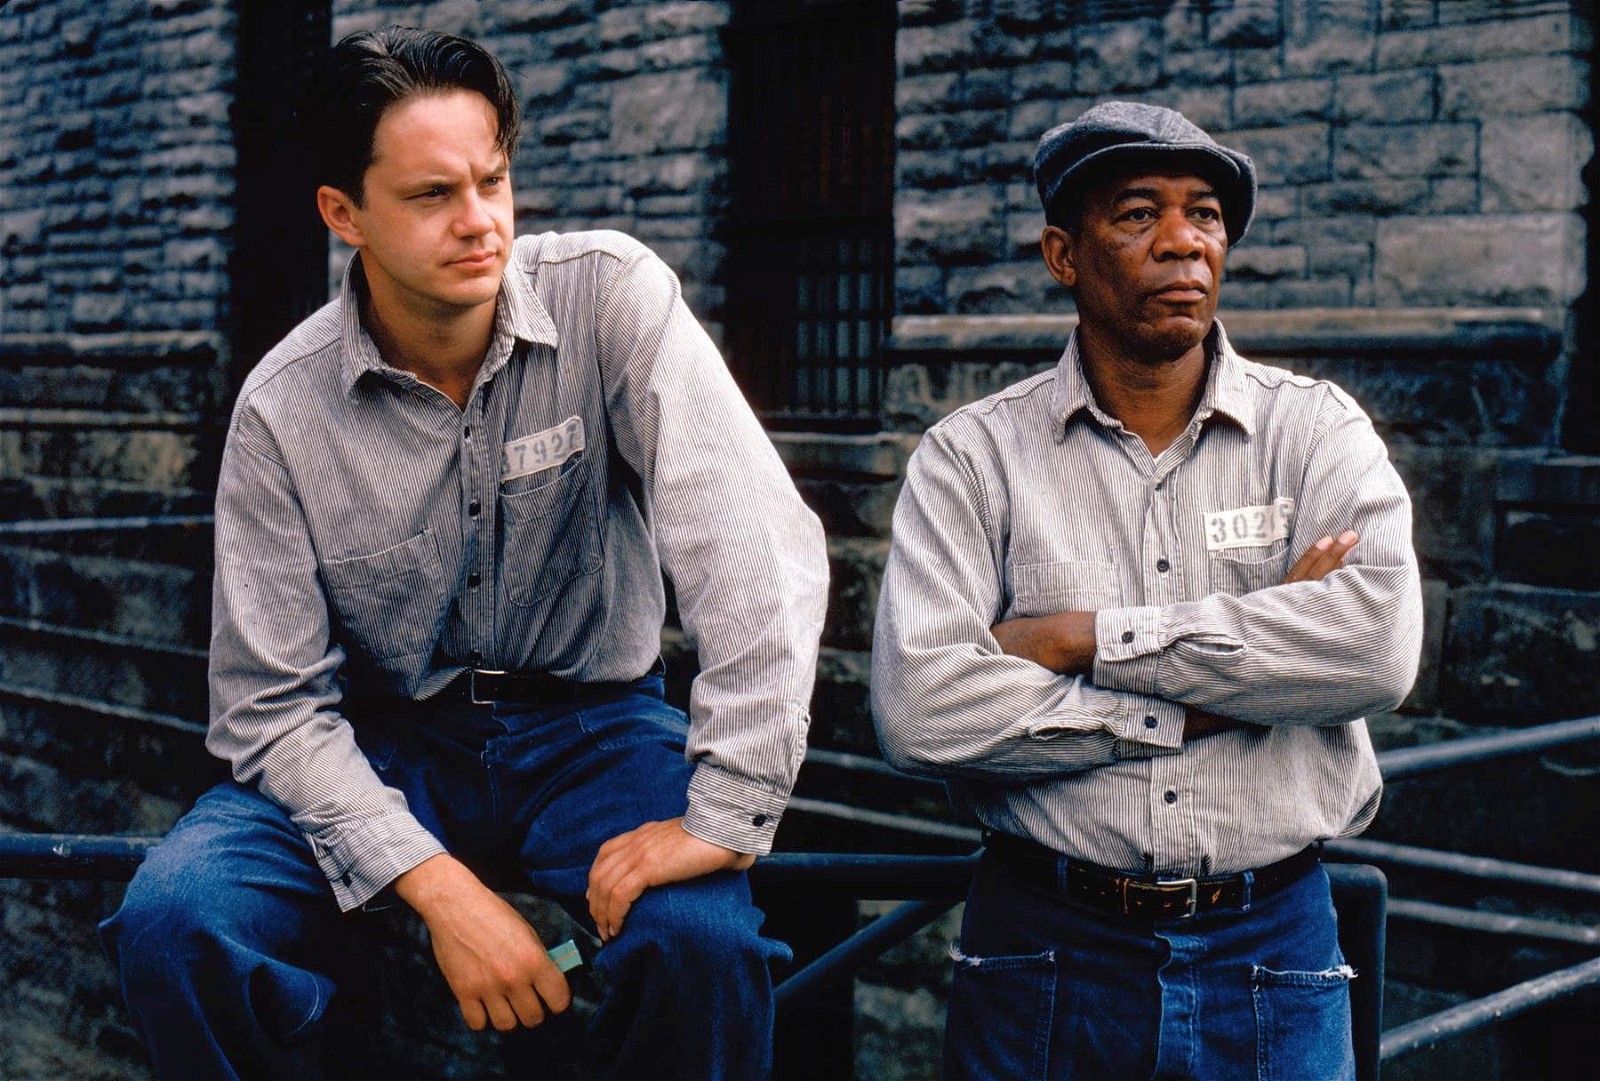 Despite being a flop upon release, The Shashank Redemption is now a beloved film